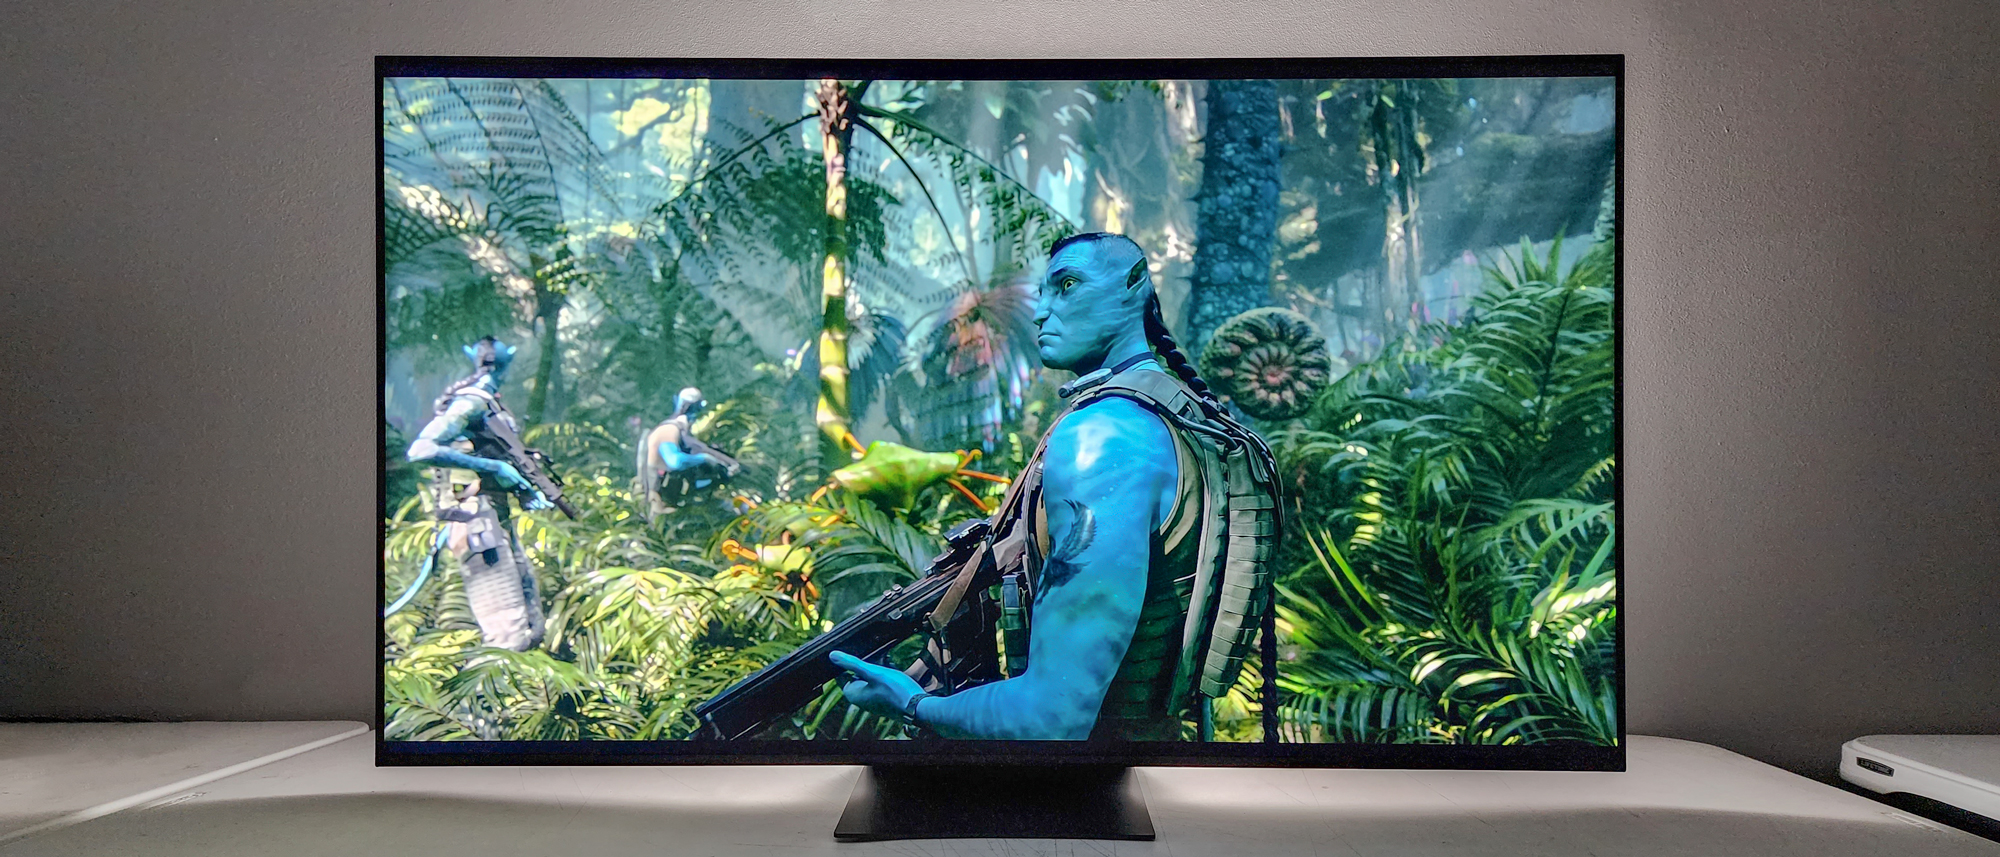 TCL QM8 Mini-LED TV review: The brightest TV we've ever tested